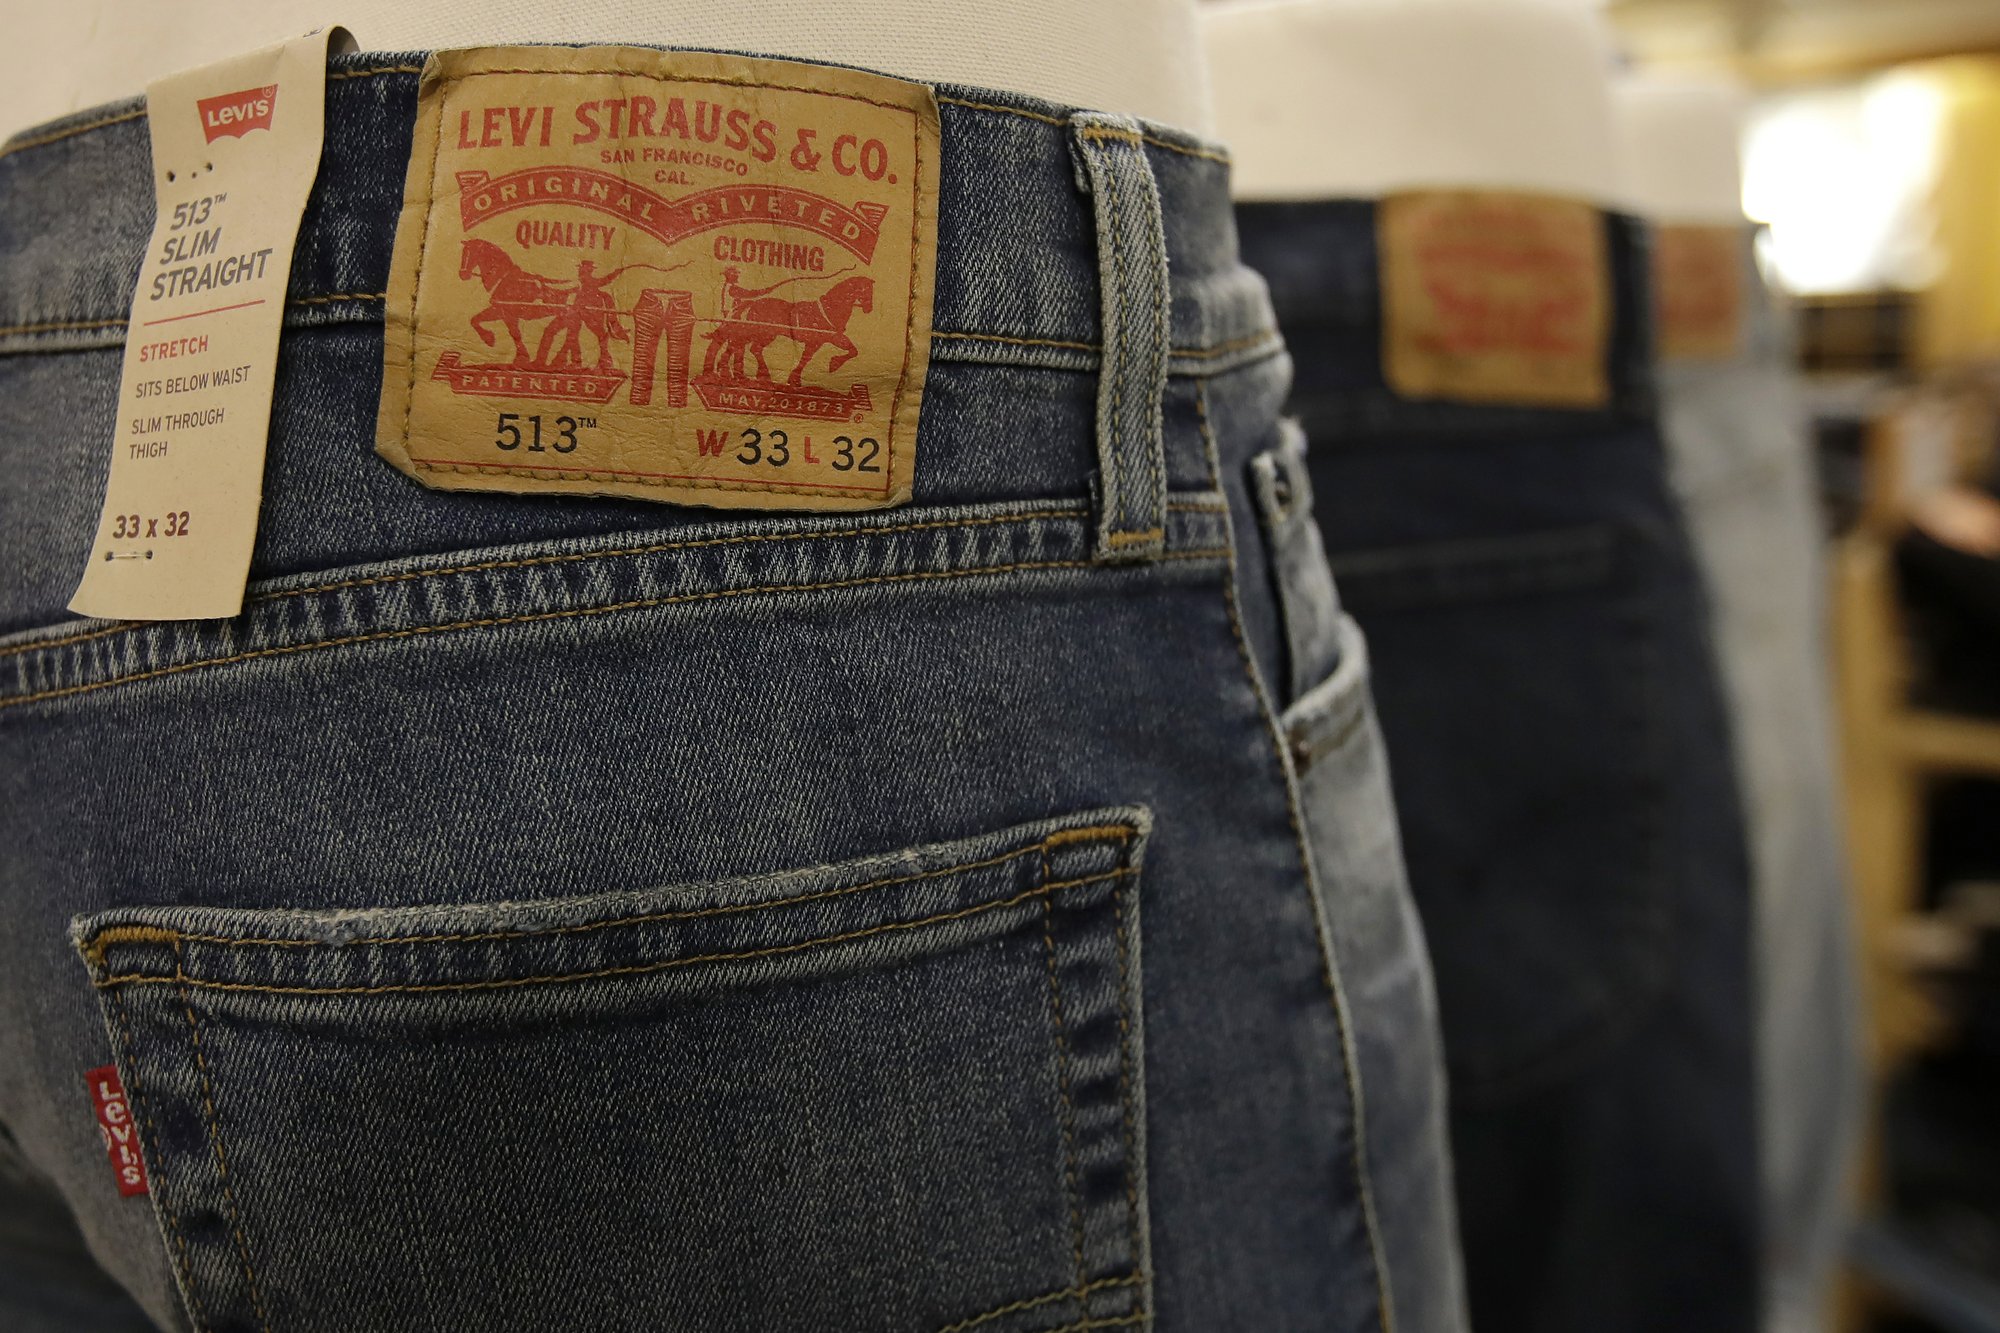 Levi's to cut 700 office jobs due to virus-related slump | AP News